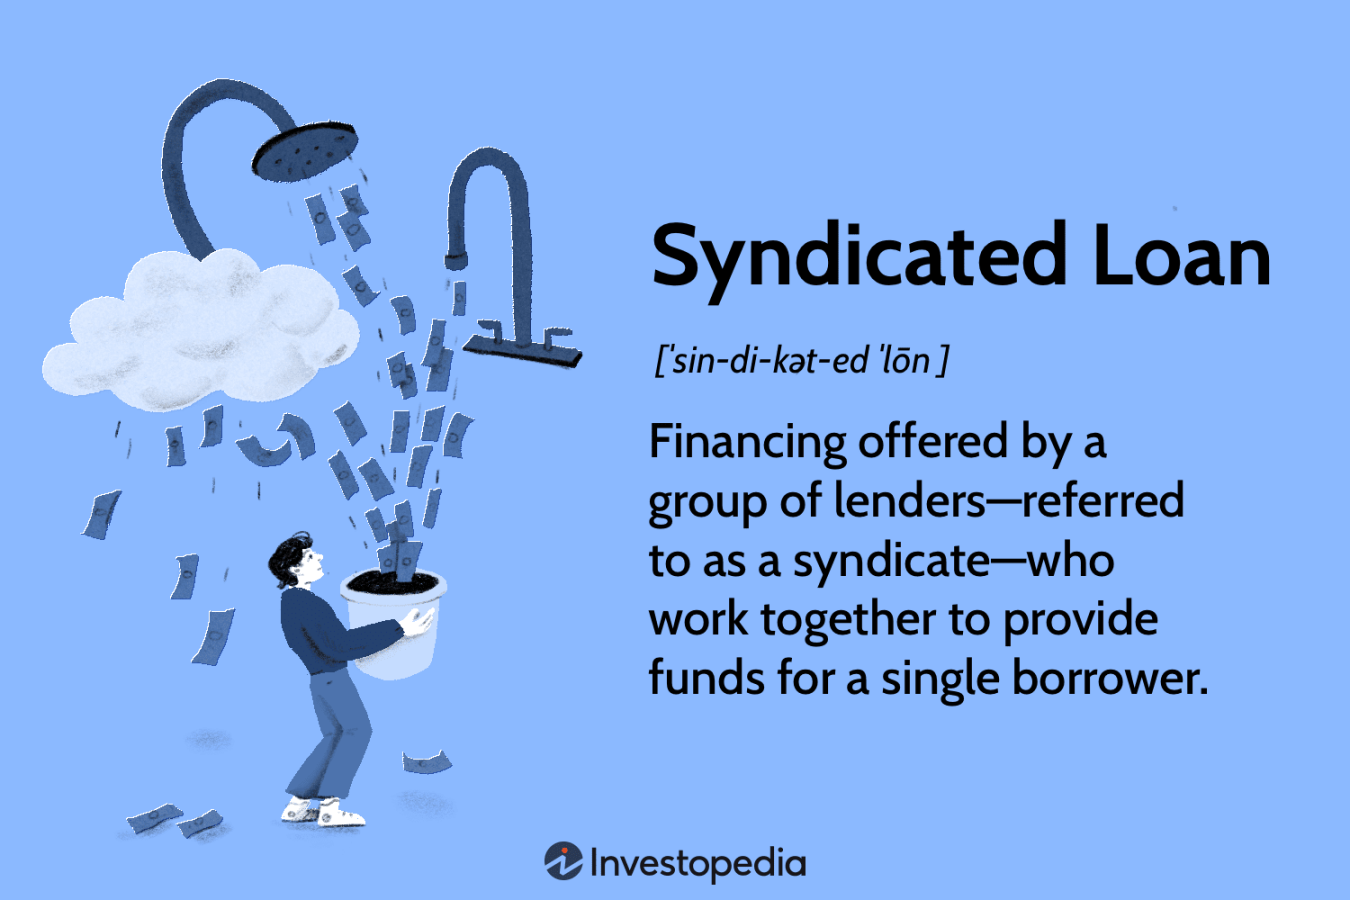 Syndicated Loan: What It Is, How It Works, and Examples